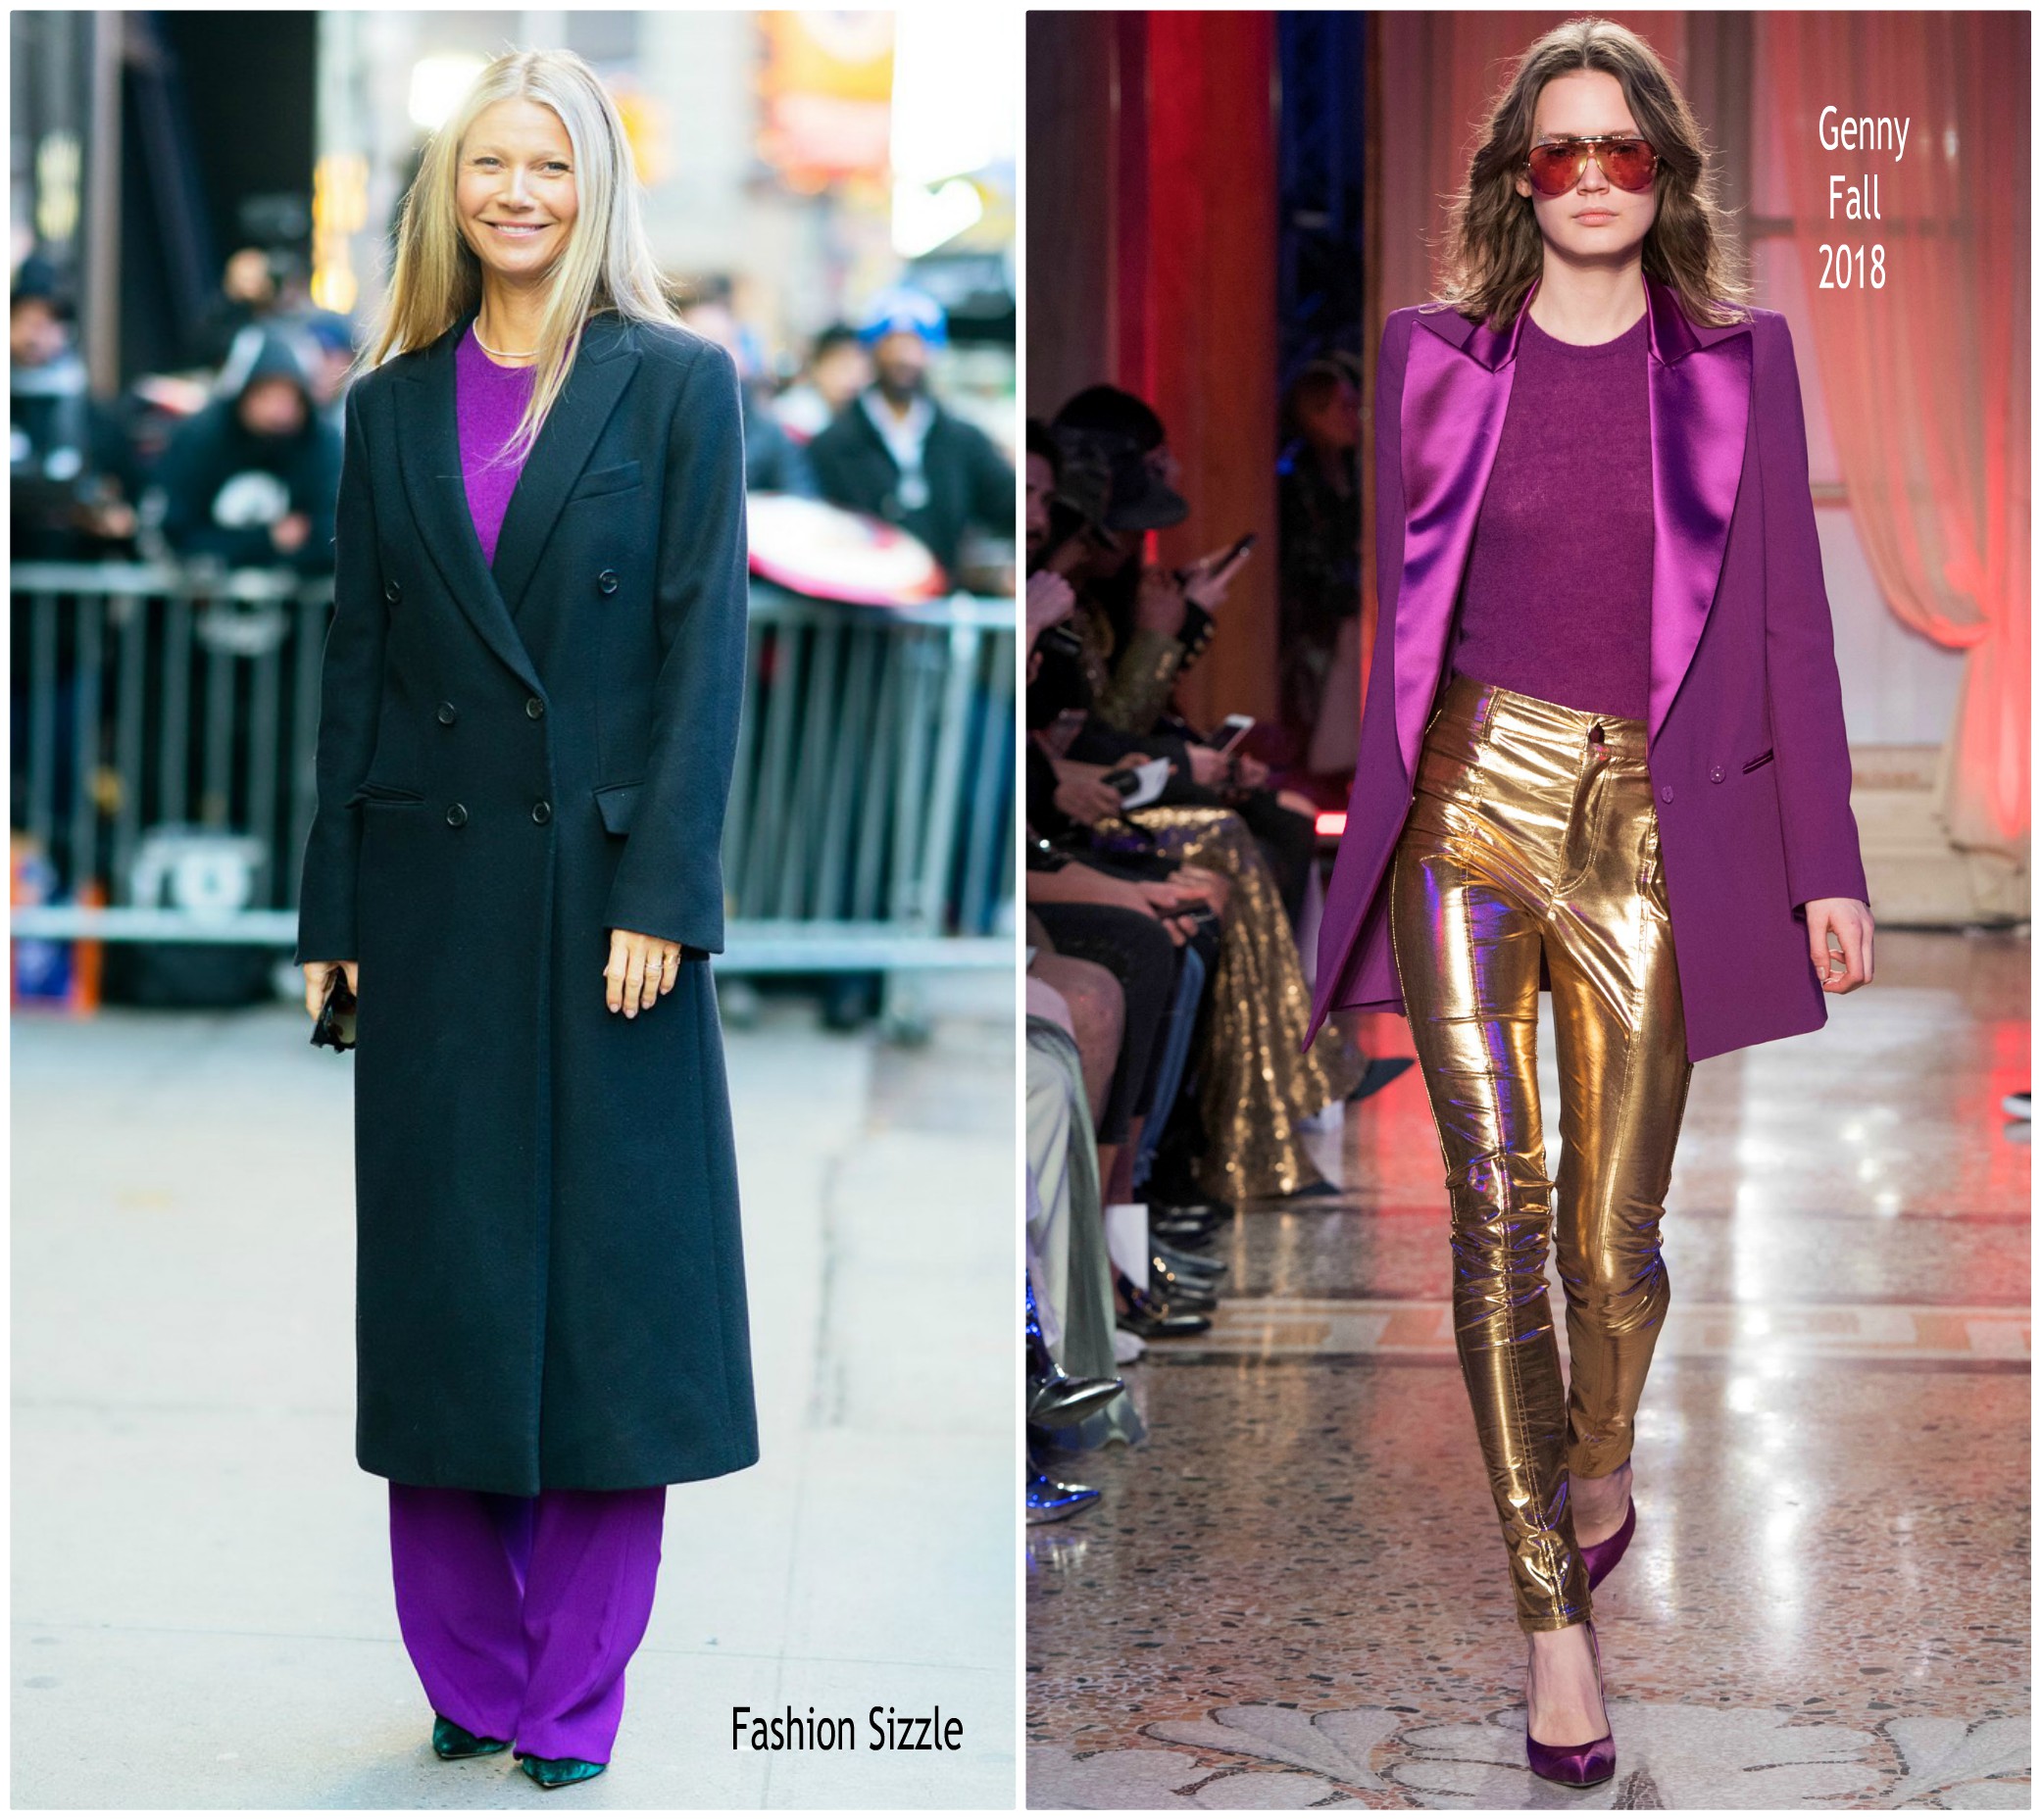 Gwyneth Paltrow In Genny & Monique Lhuillier @ Good Morning America & Live with Kelly & Ryan